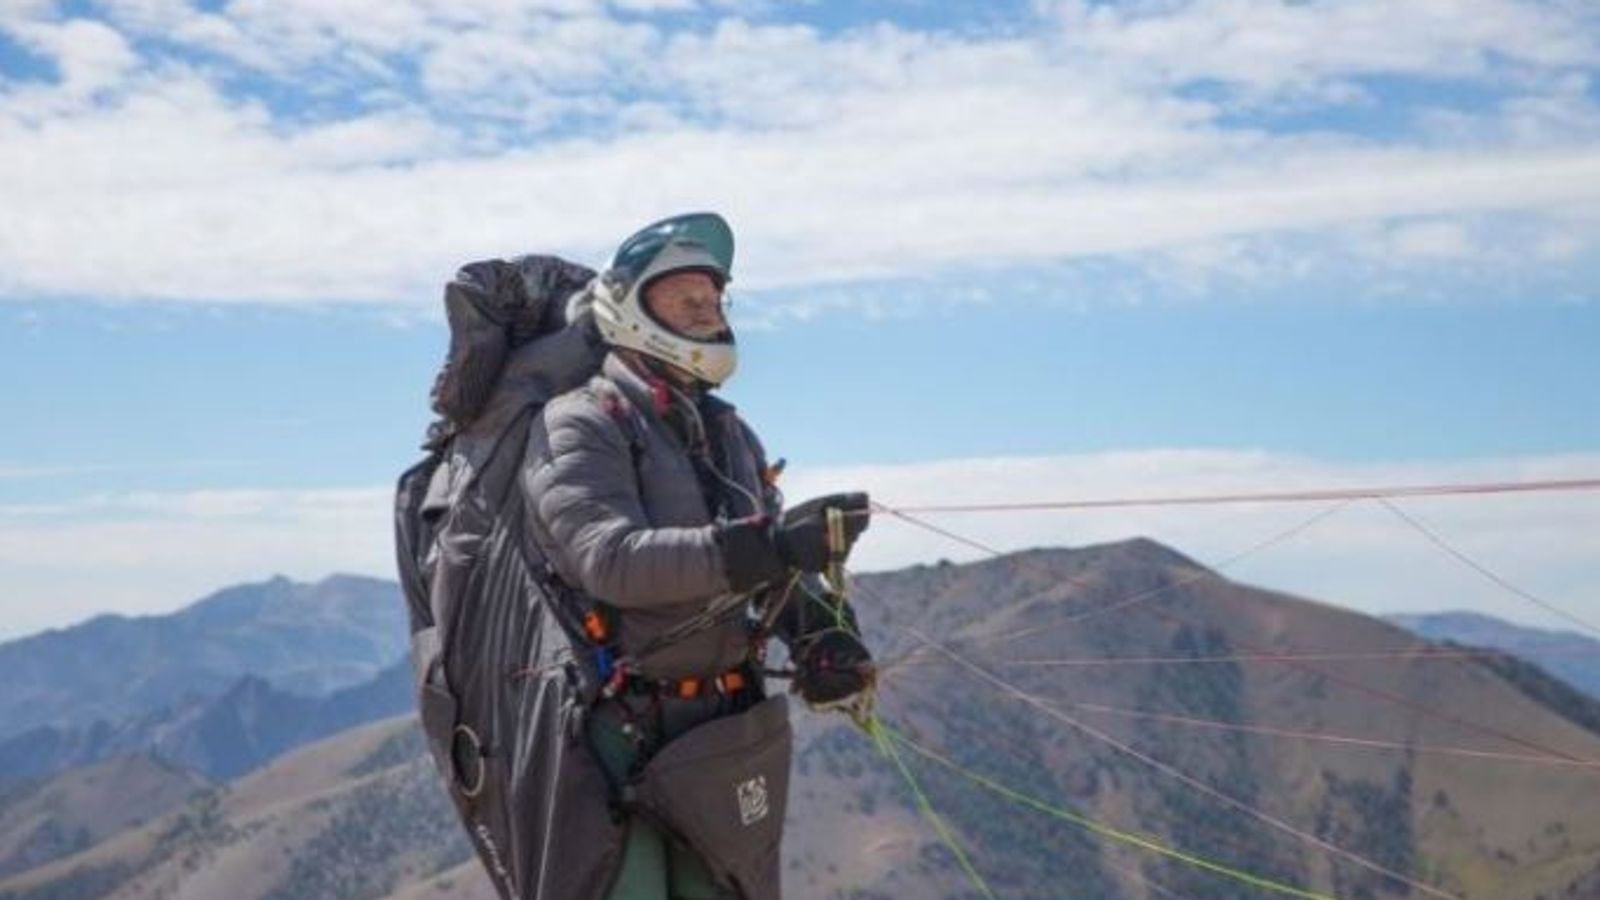 body-of-wellknown-paraglider-found-in-us-mountains-weeks-after-he-went-missing